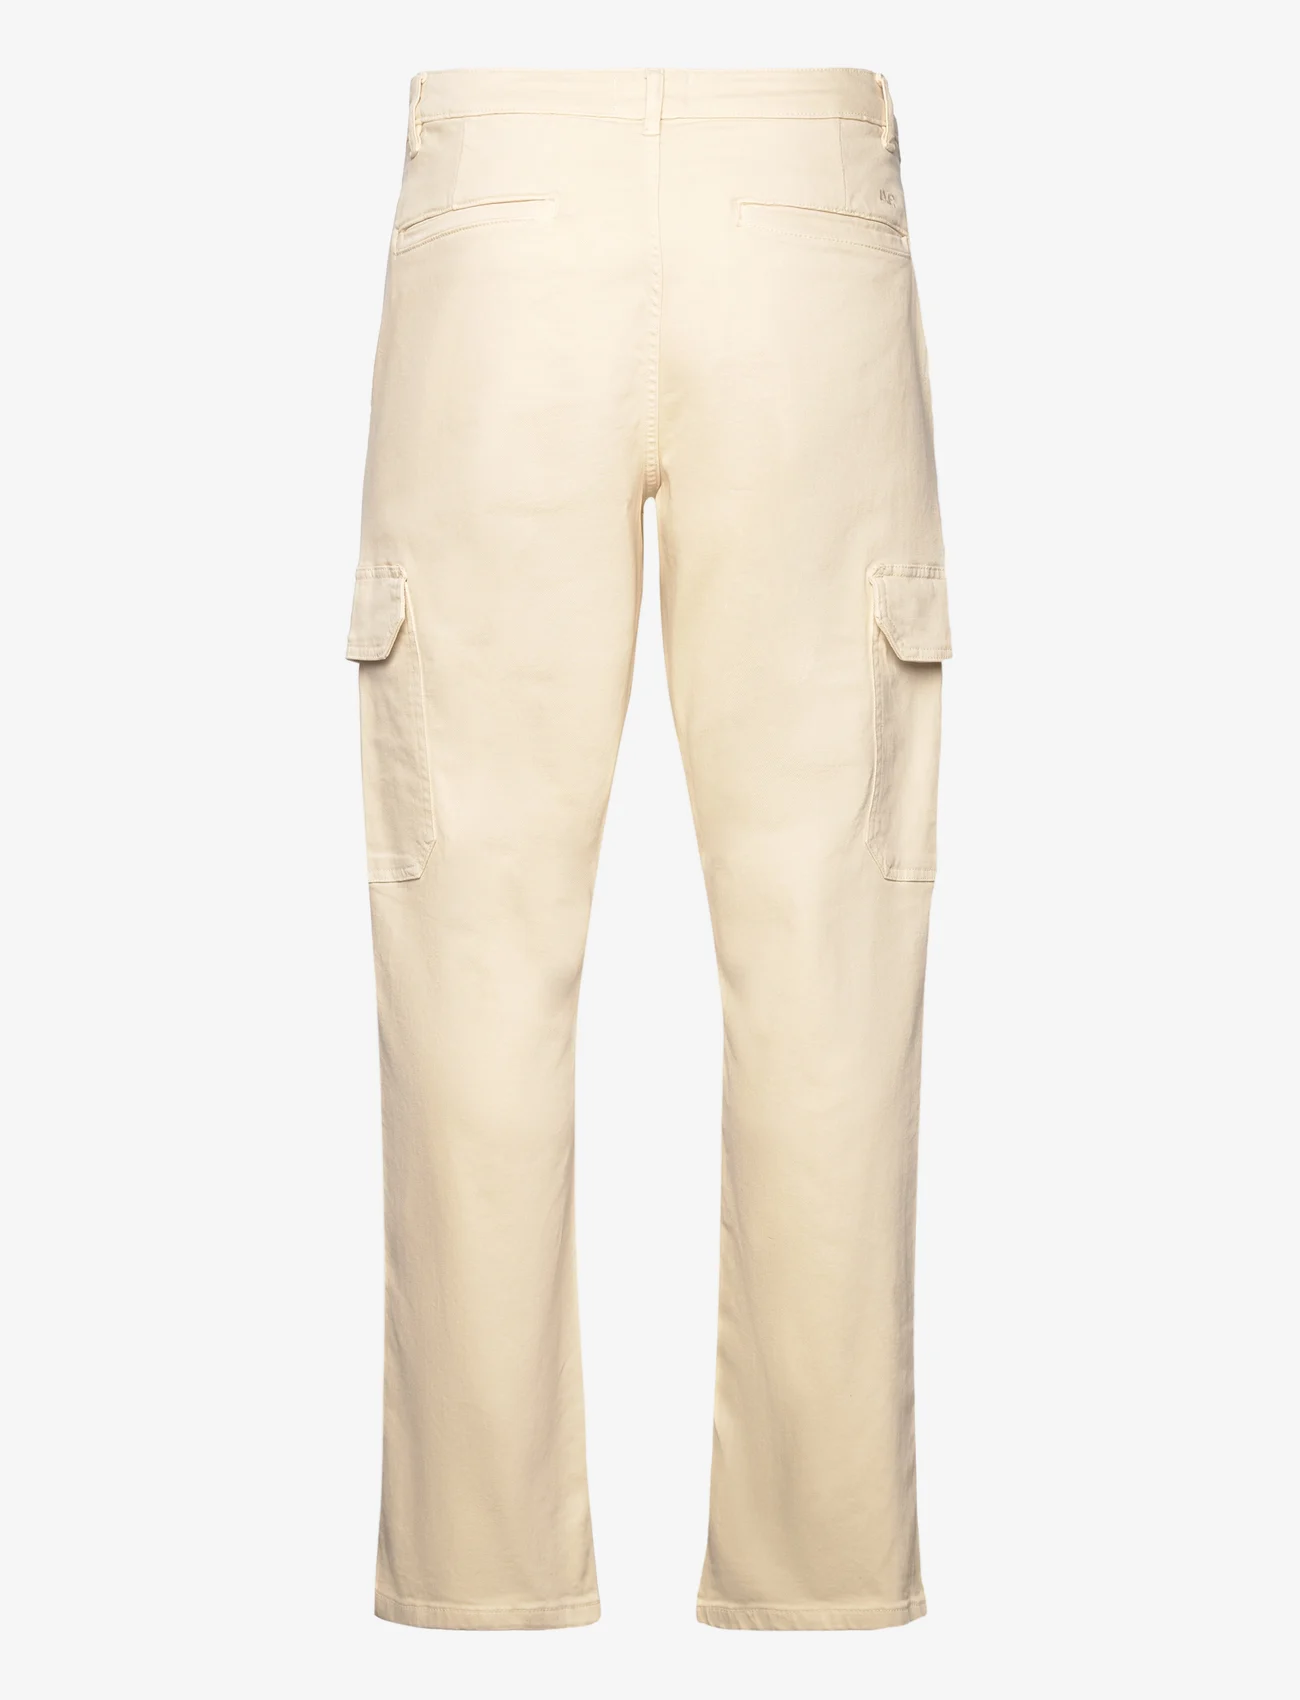 Denim project - DPCargo Recycled Pants - cargobroek - bleached sand - 1